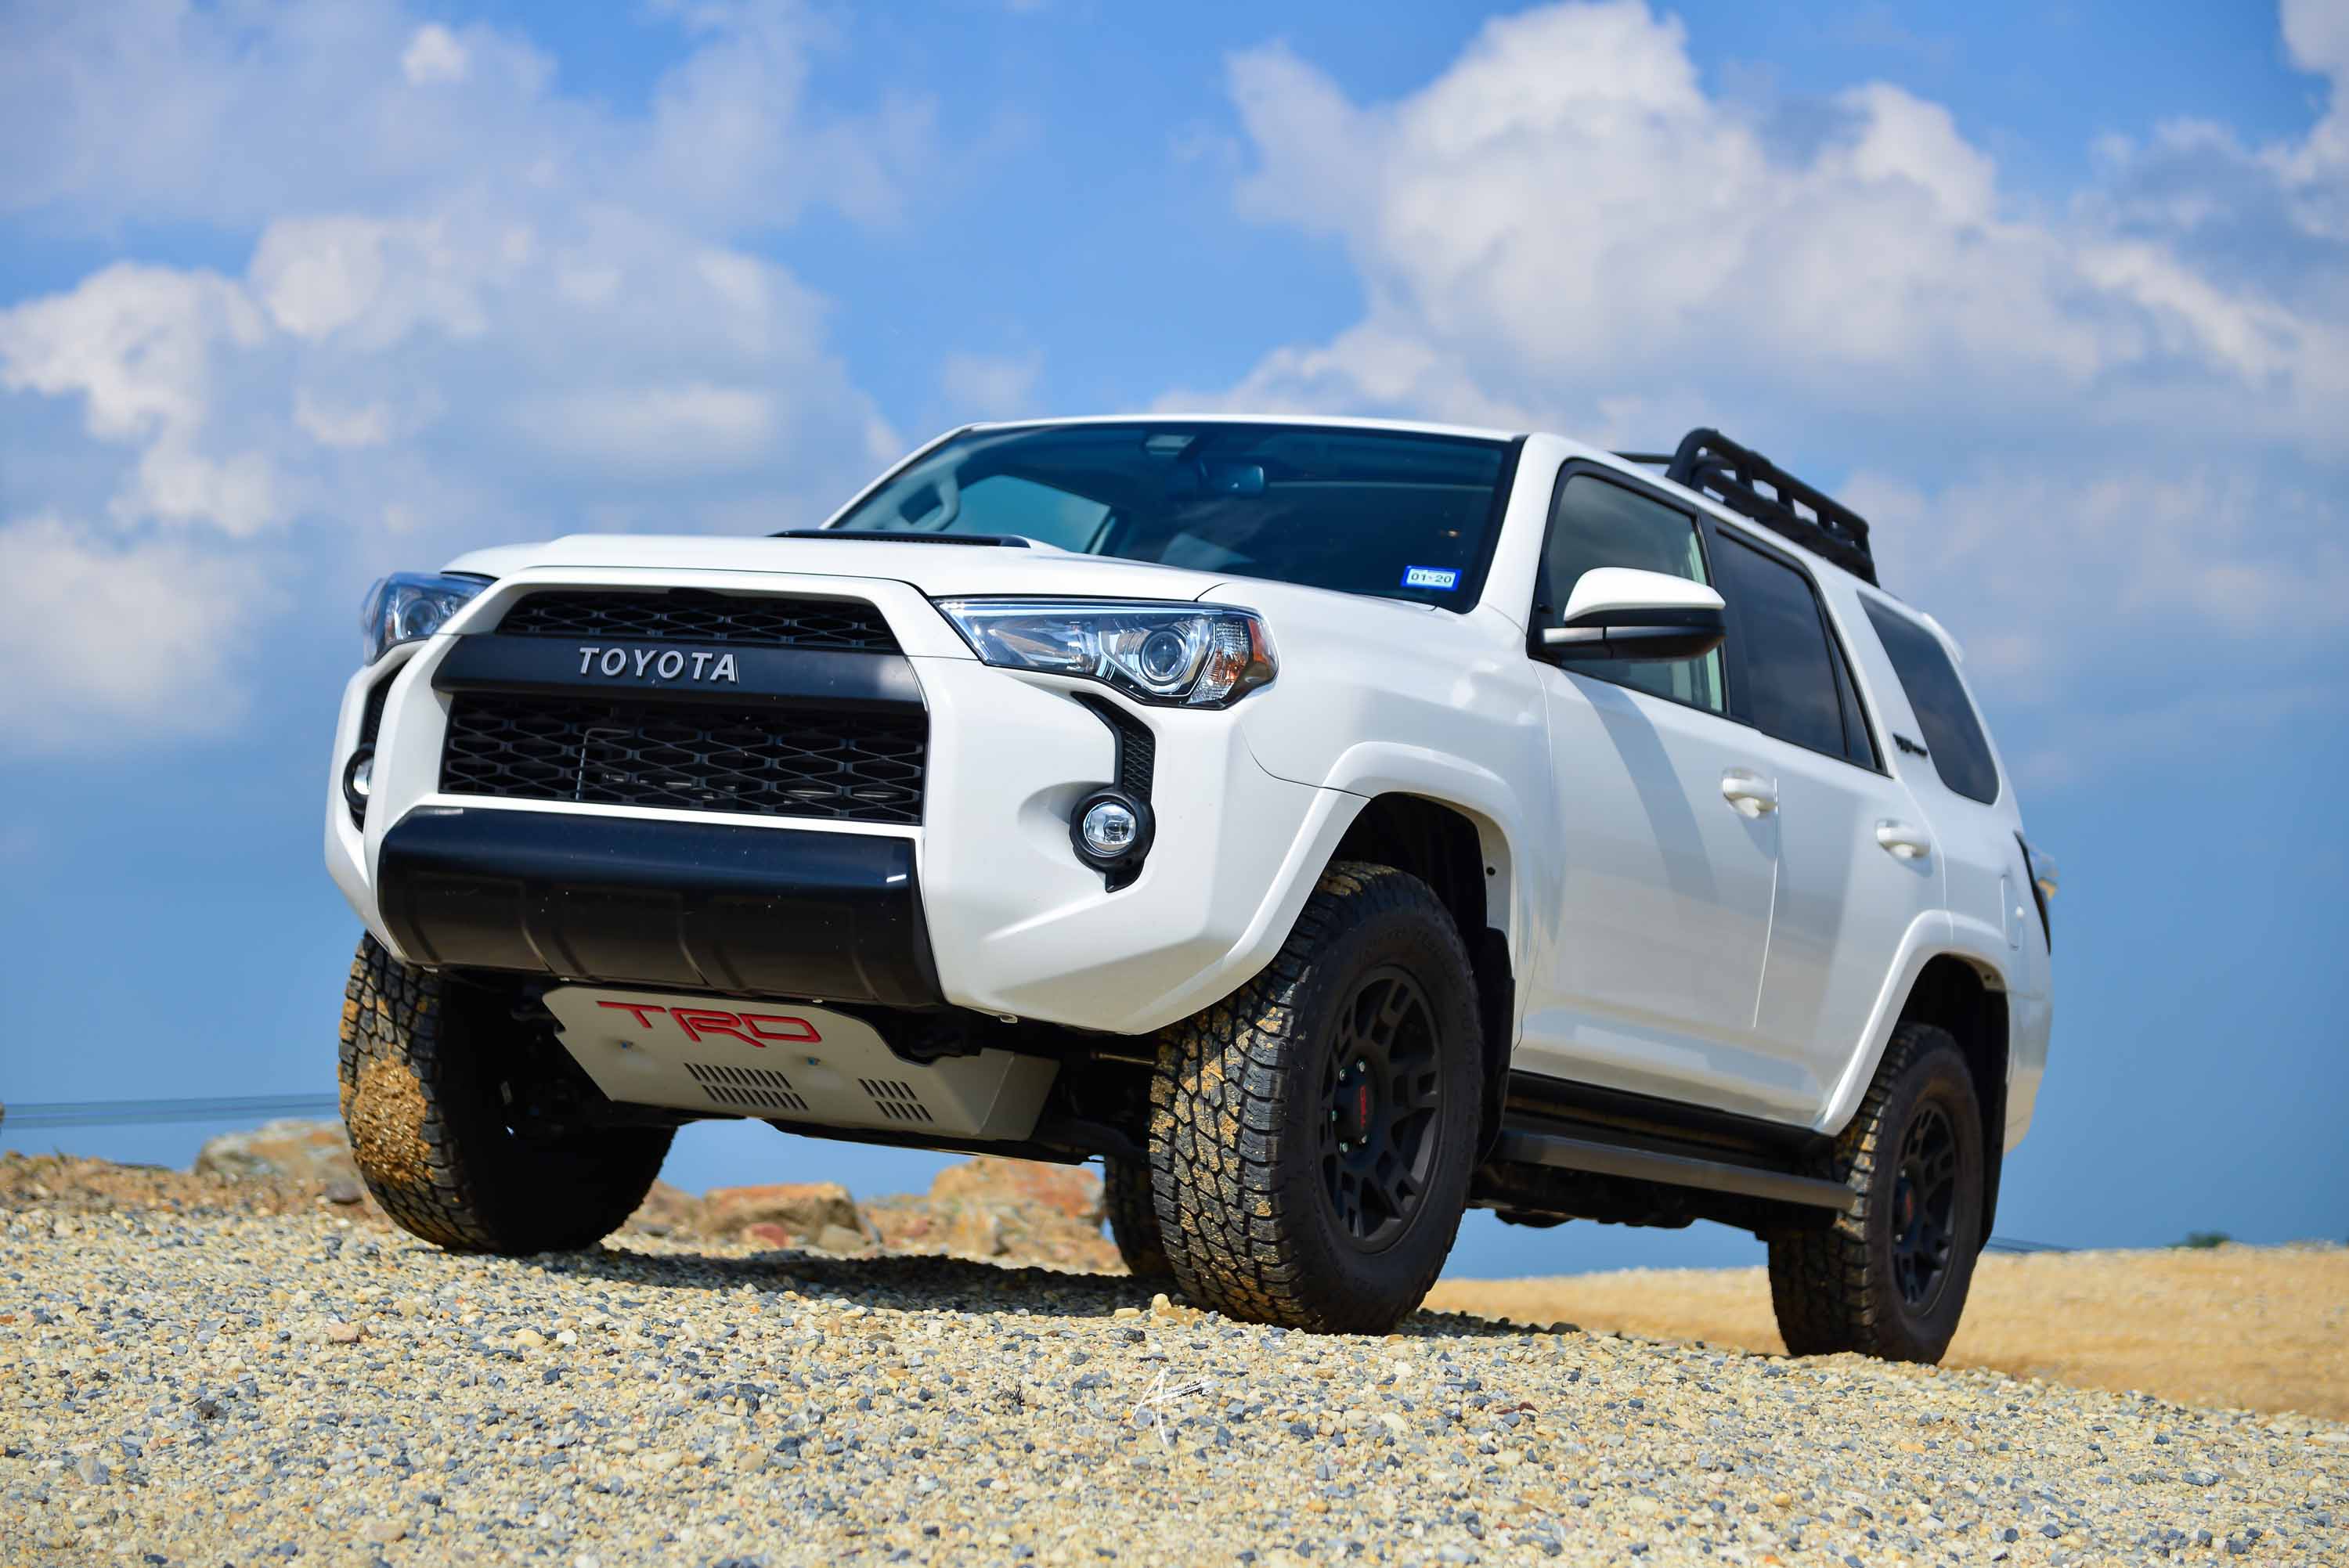 The 2019 Toyota 4Runner 4X4 TRD Pro is the off-road champ - Adrenaline Lifestyles